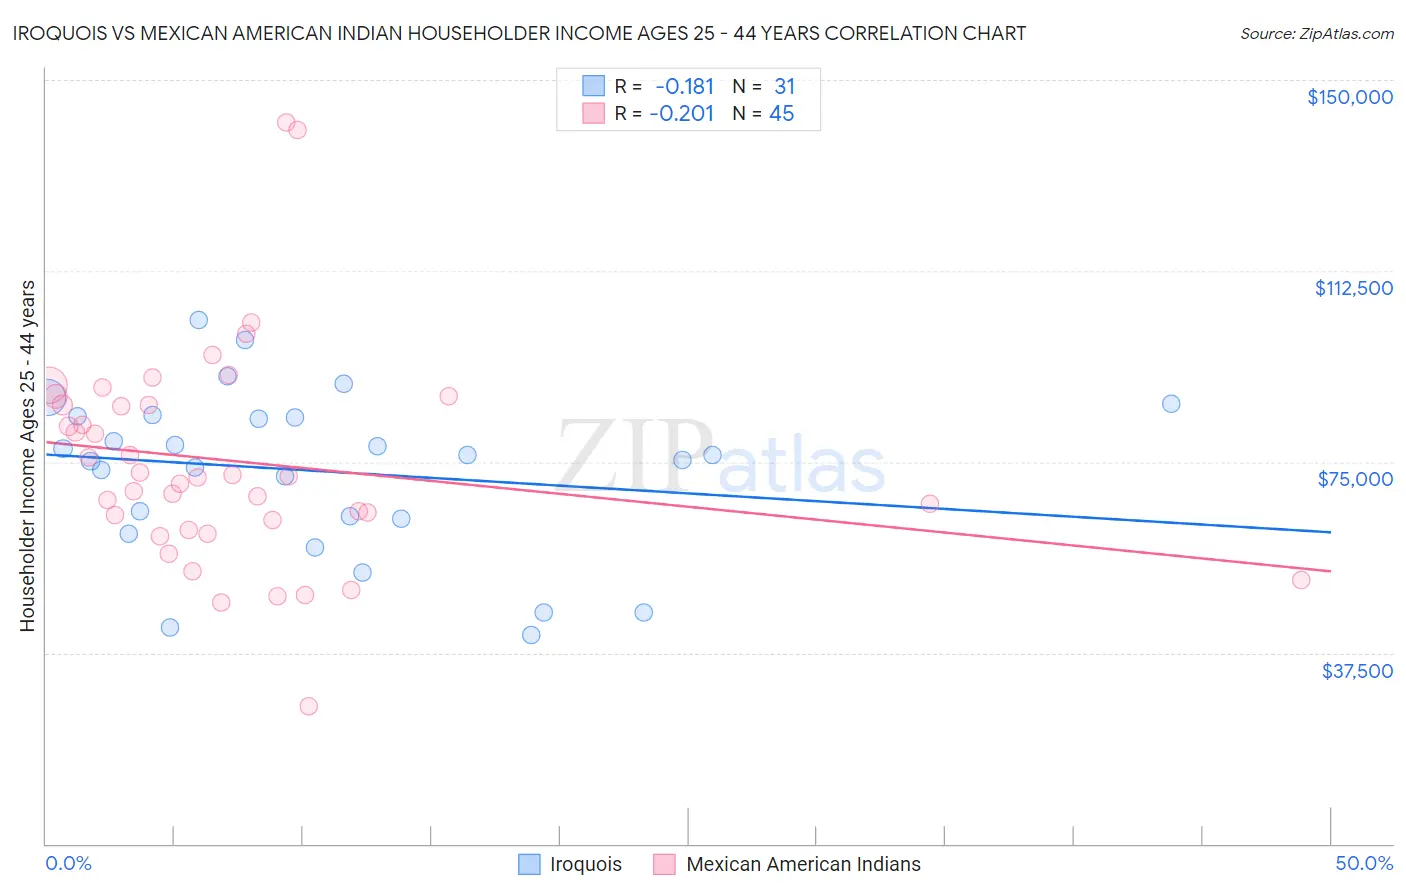 Iroquois vs Mexican American Indian Householder Income Ages 25 - 44 years